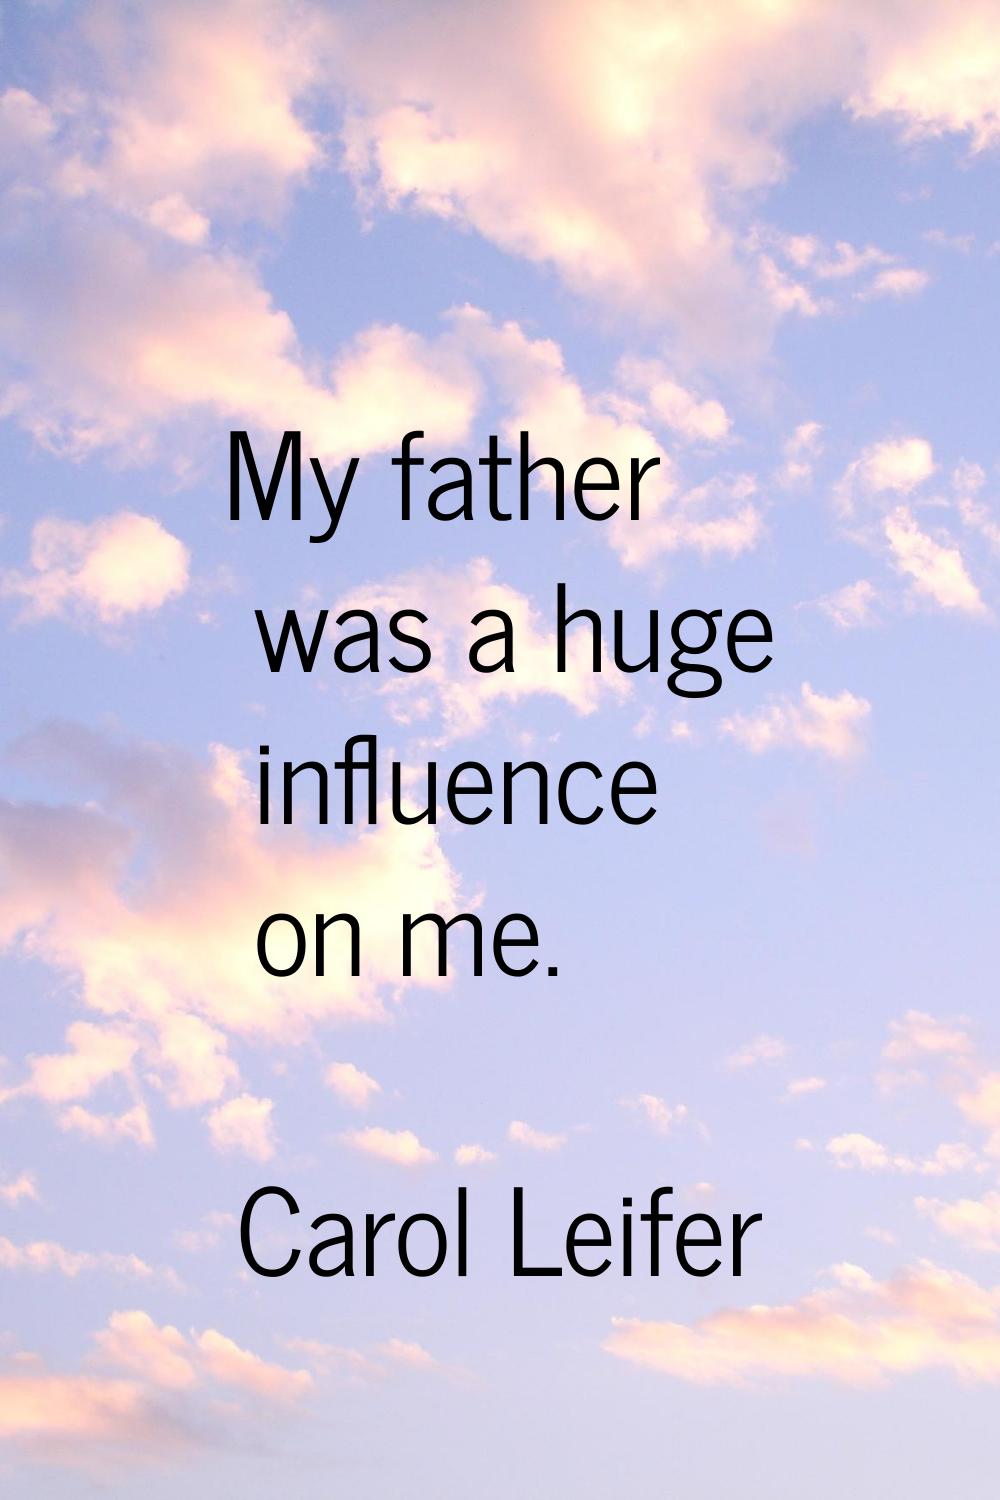 My father was a huge influence on me.